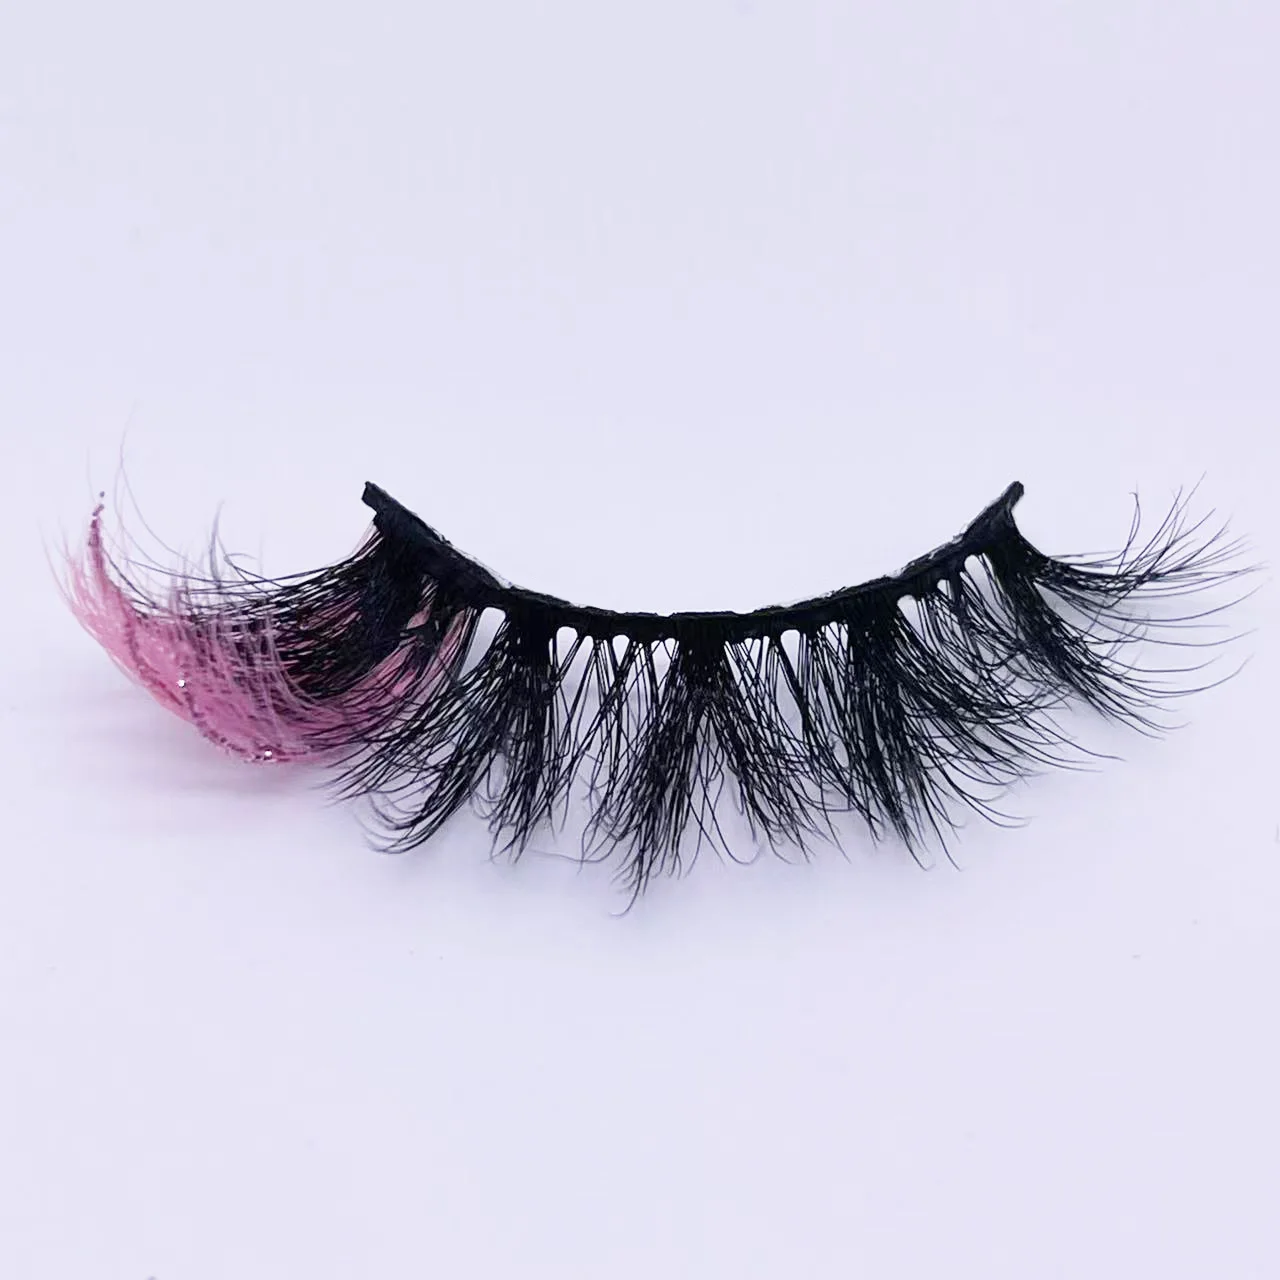 Hbzgtlad Colored Lashes Glitter Mink 15mm -20mm Fluffy Color Streaks Cosplay Makeup Beauty Eyelashes -Outlet Maid Outfit Store S079abbf76ddb4eb48d89a316da883d79j.jpg